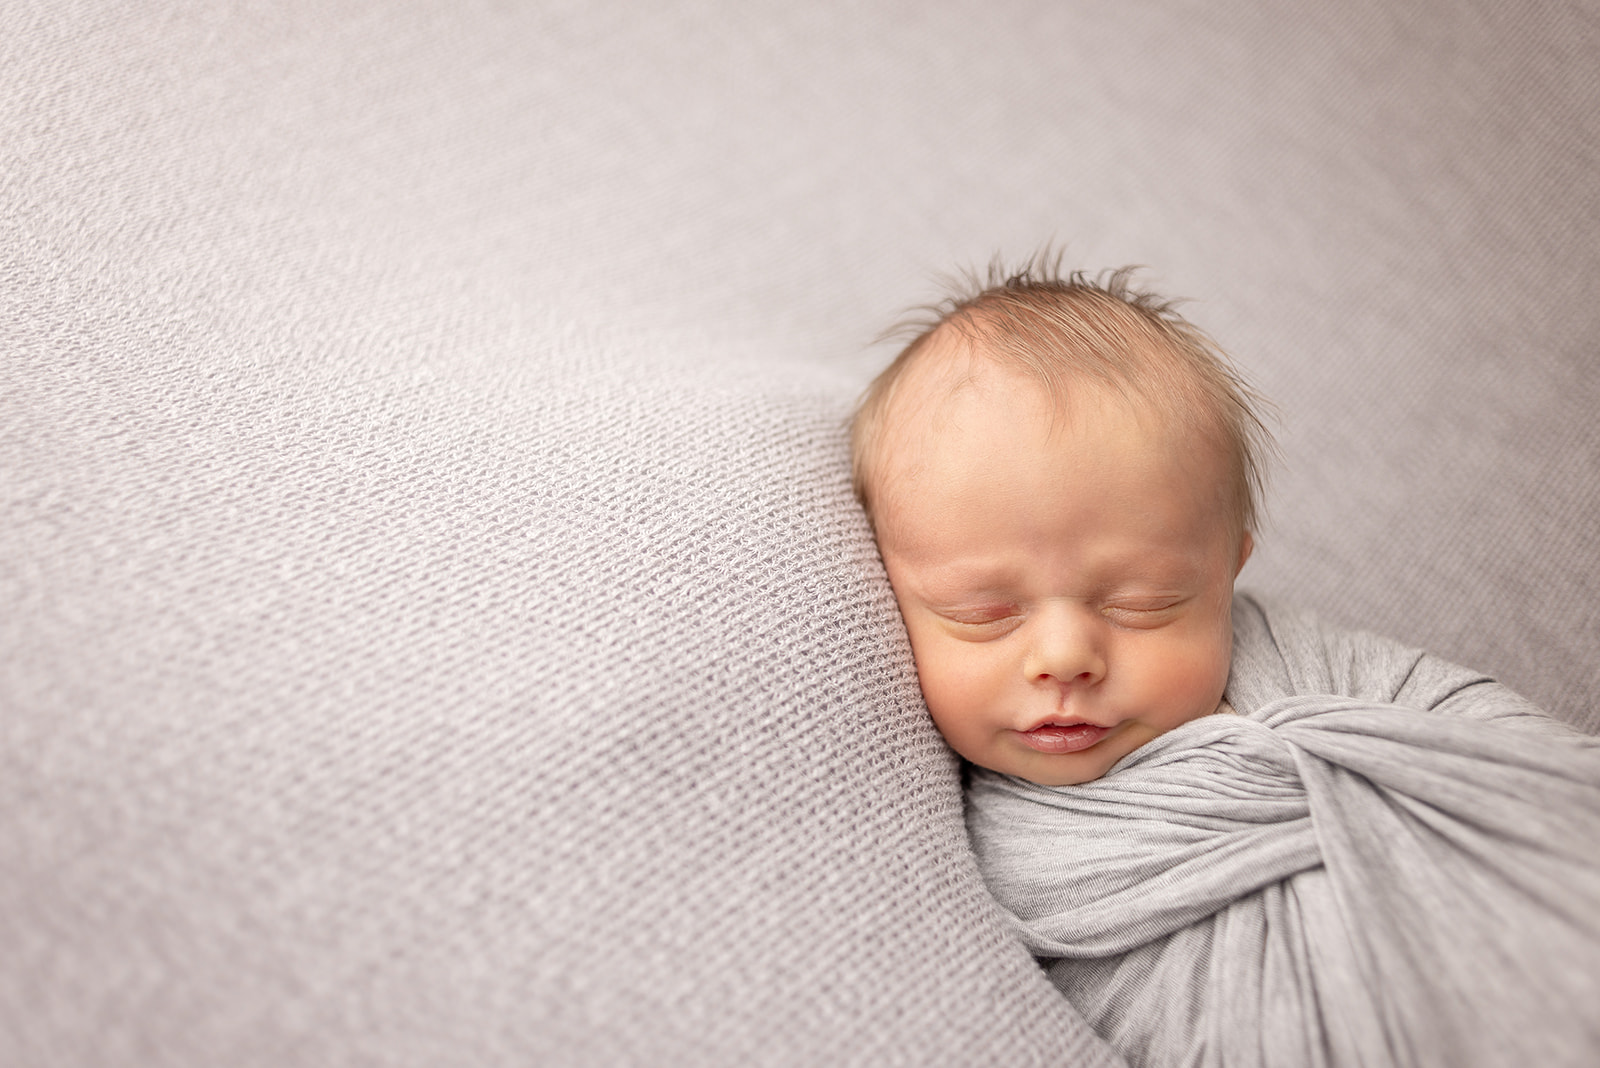 baby boy newborn professional pictures with neutral colors in carthage, missouri